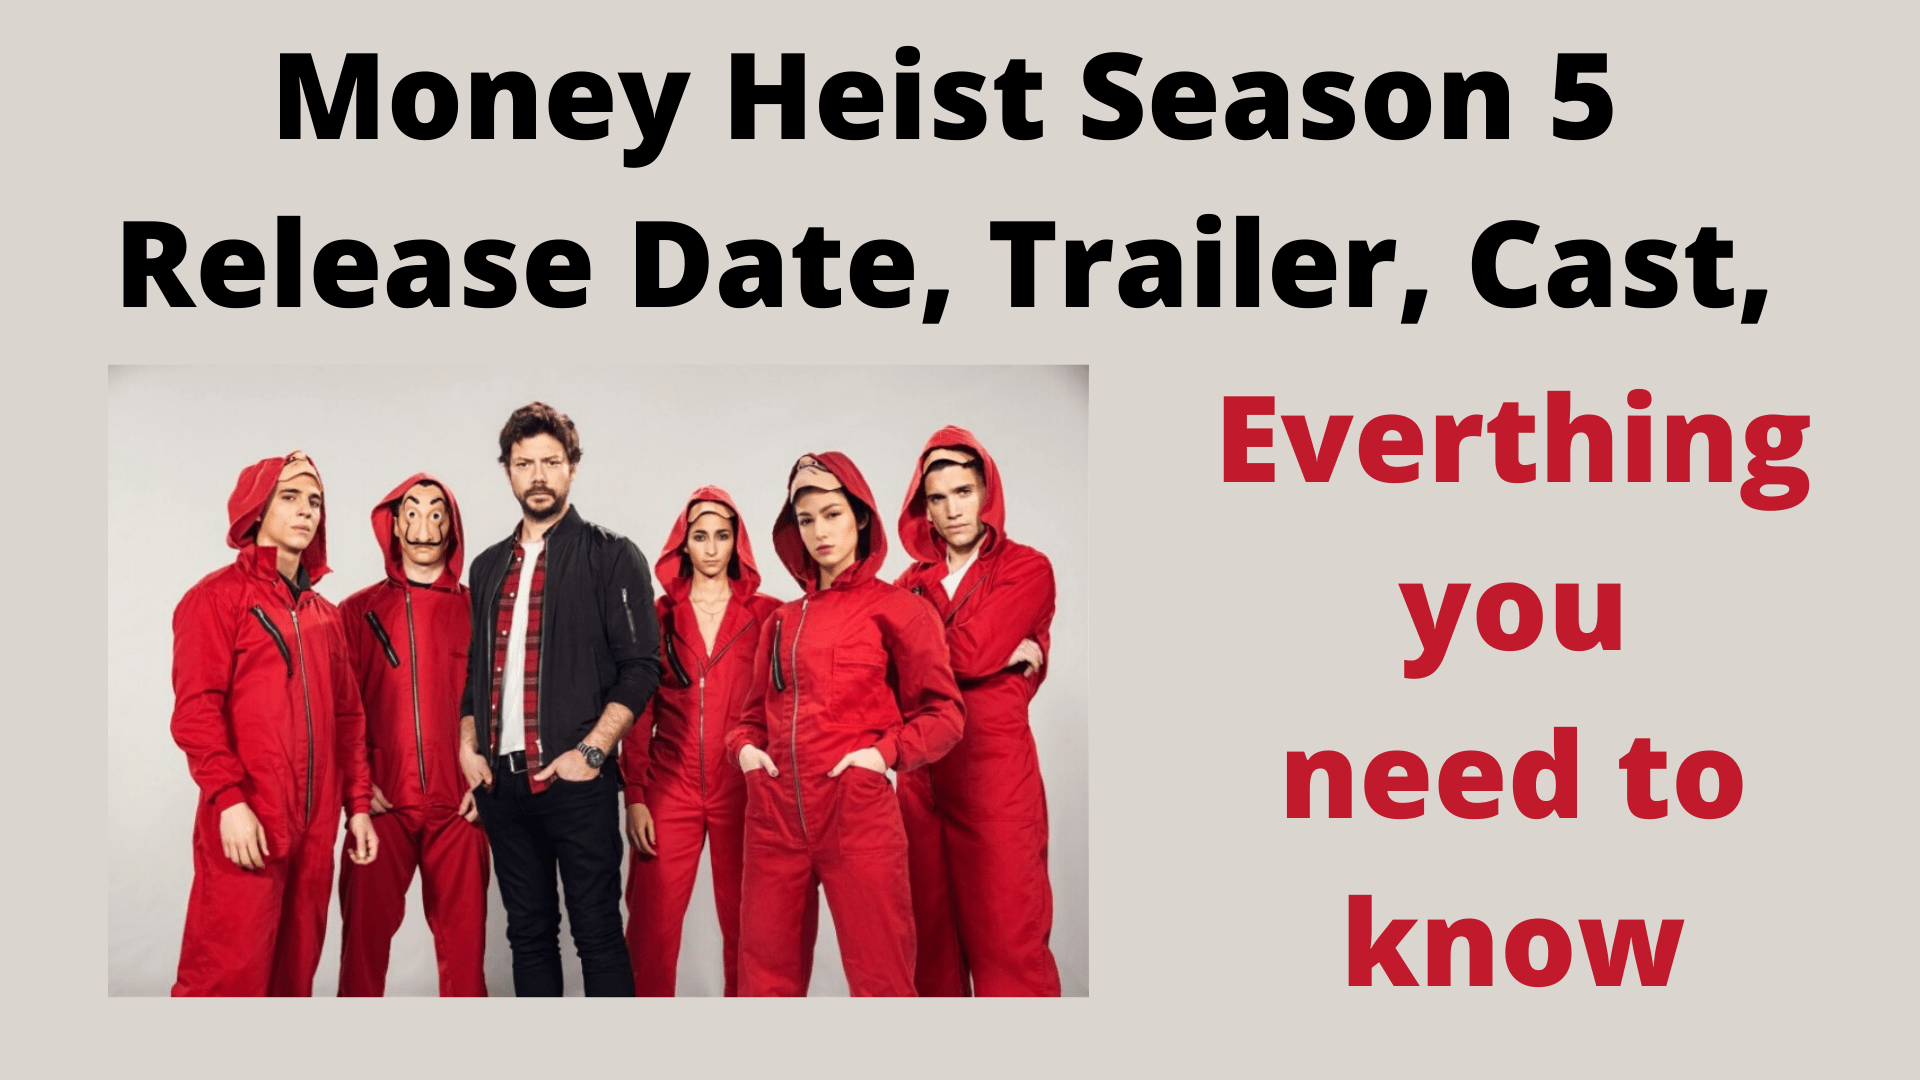 Money Heist Season 5 When Will It Release_ Trailer, Cast, death story and all